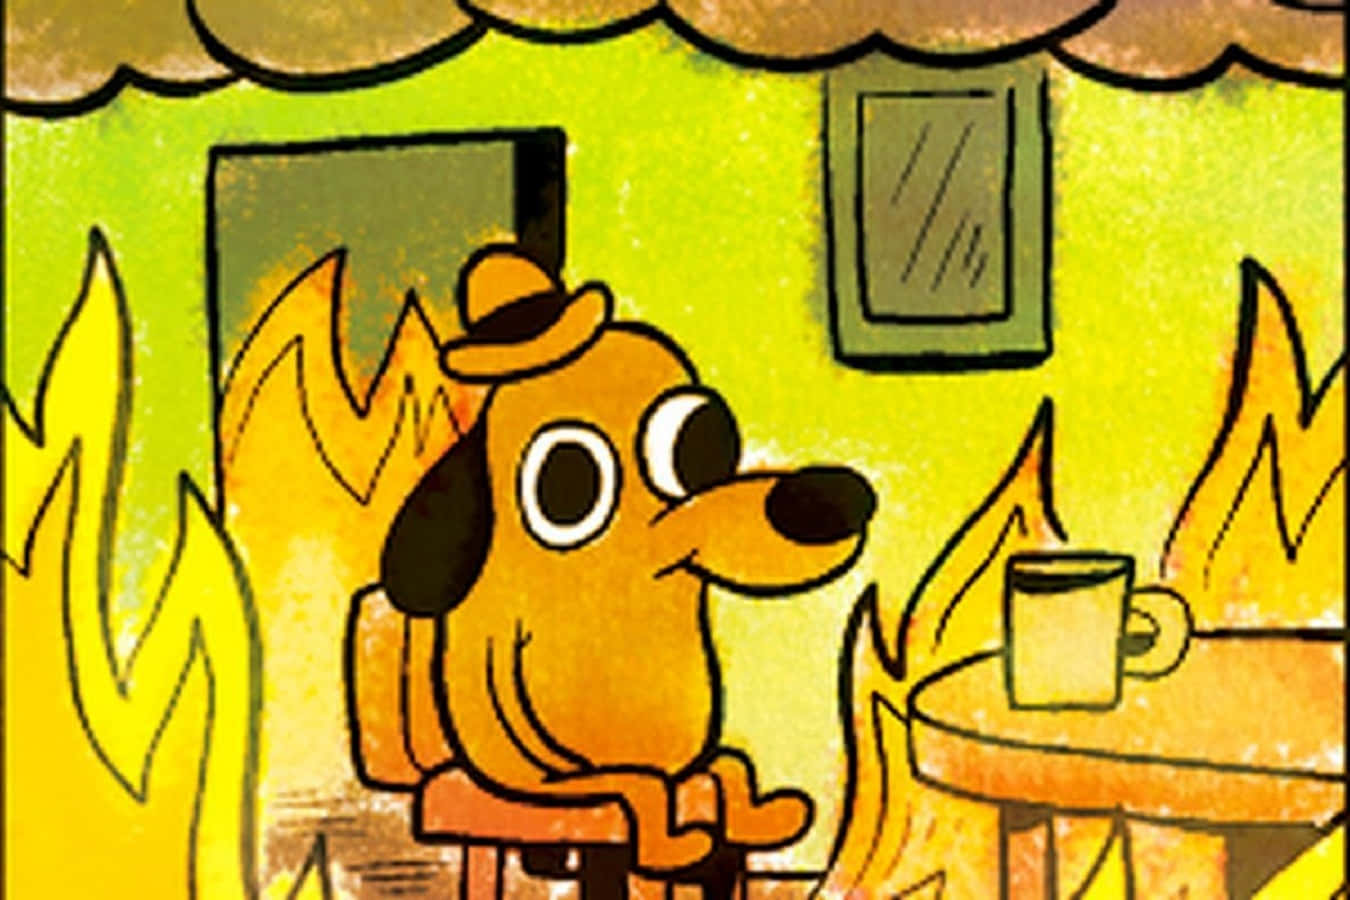 This Is Fine Background